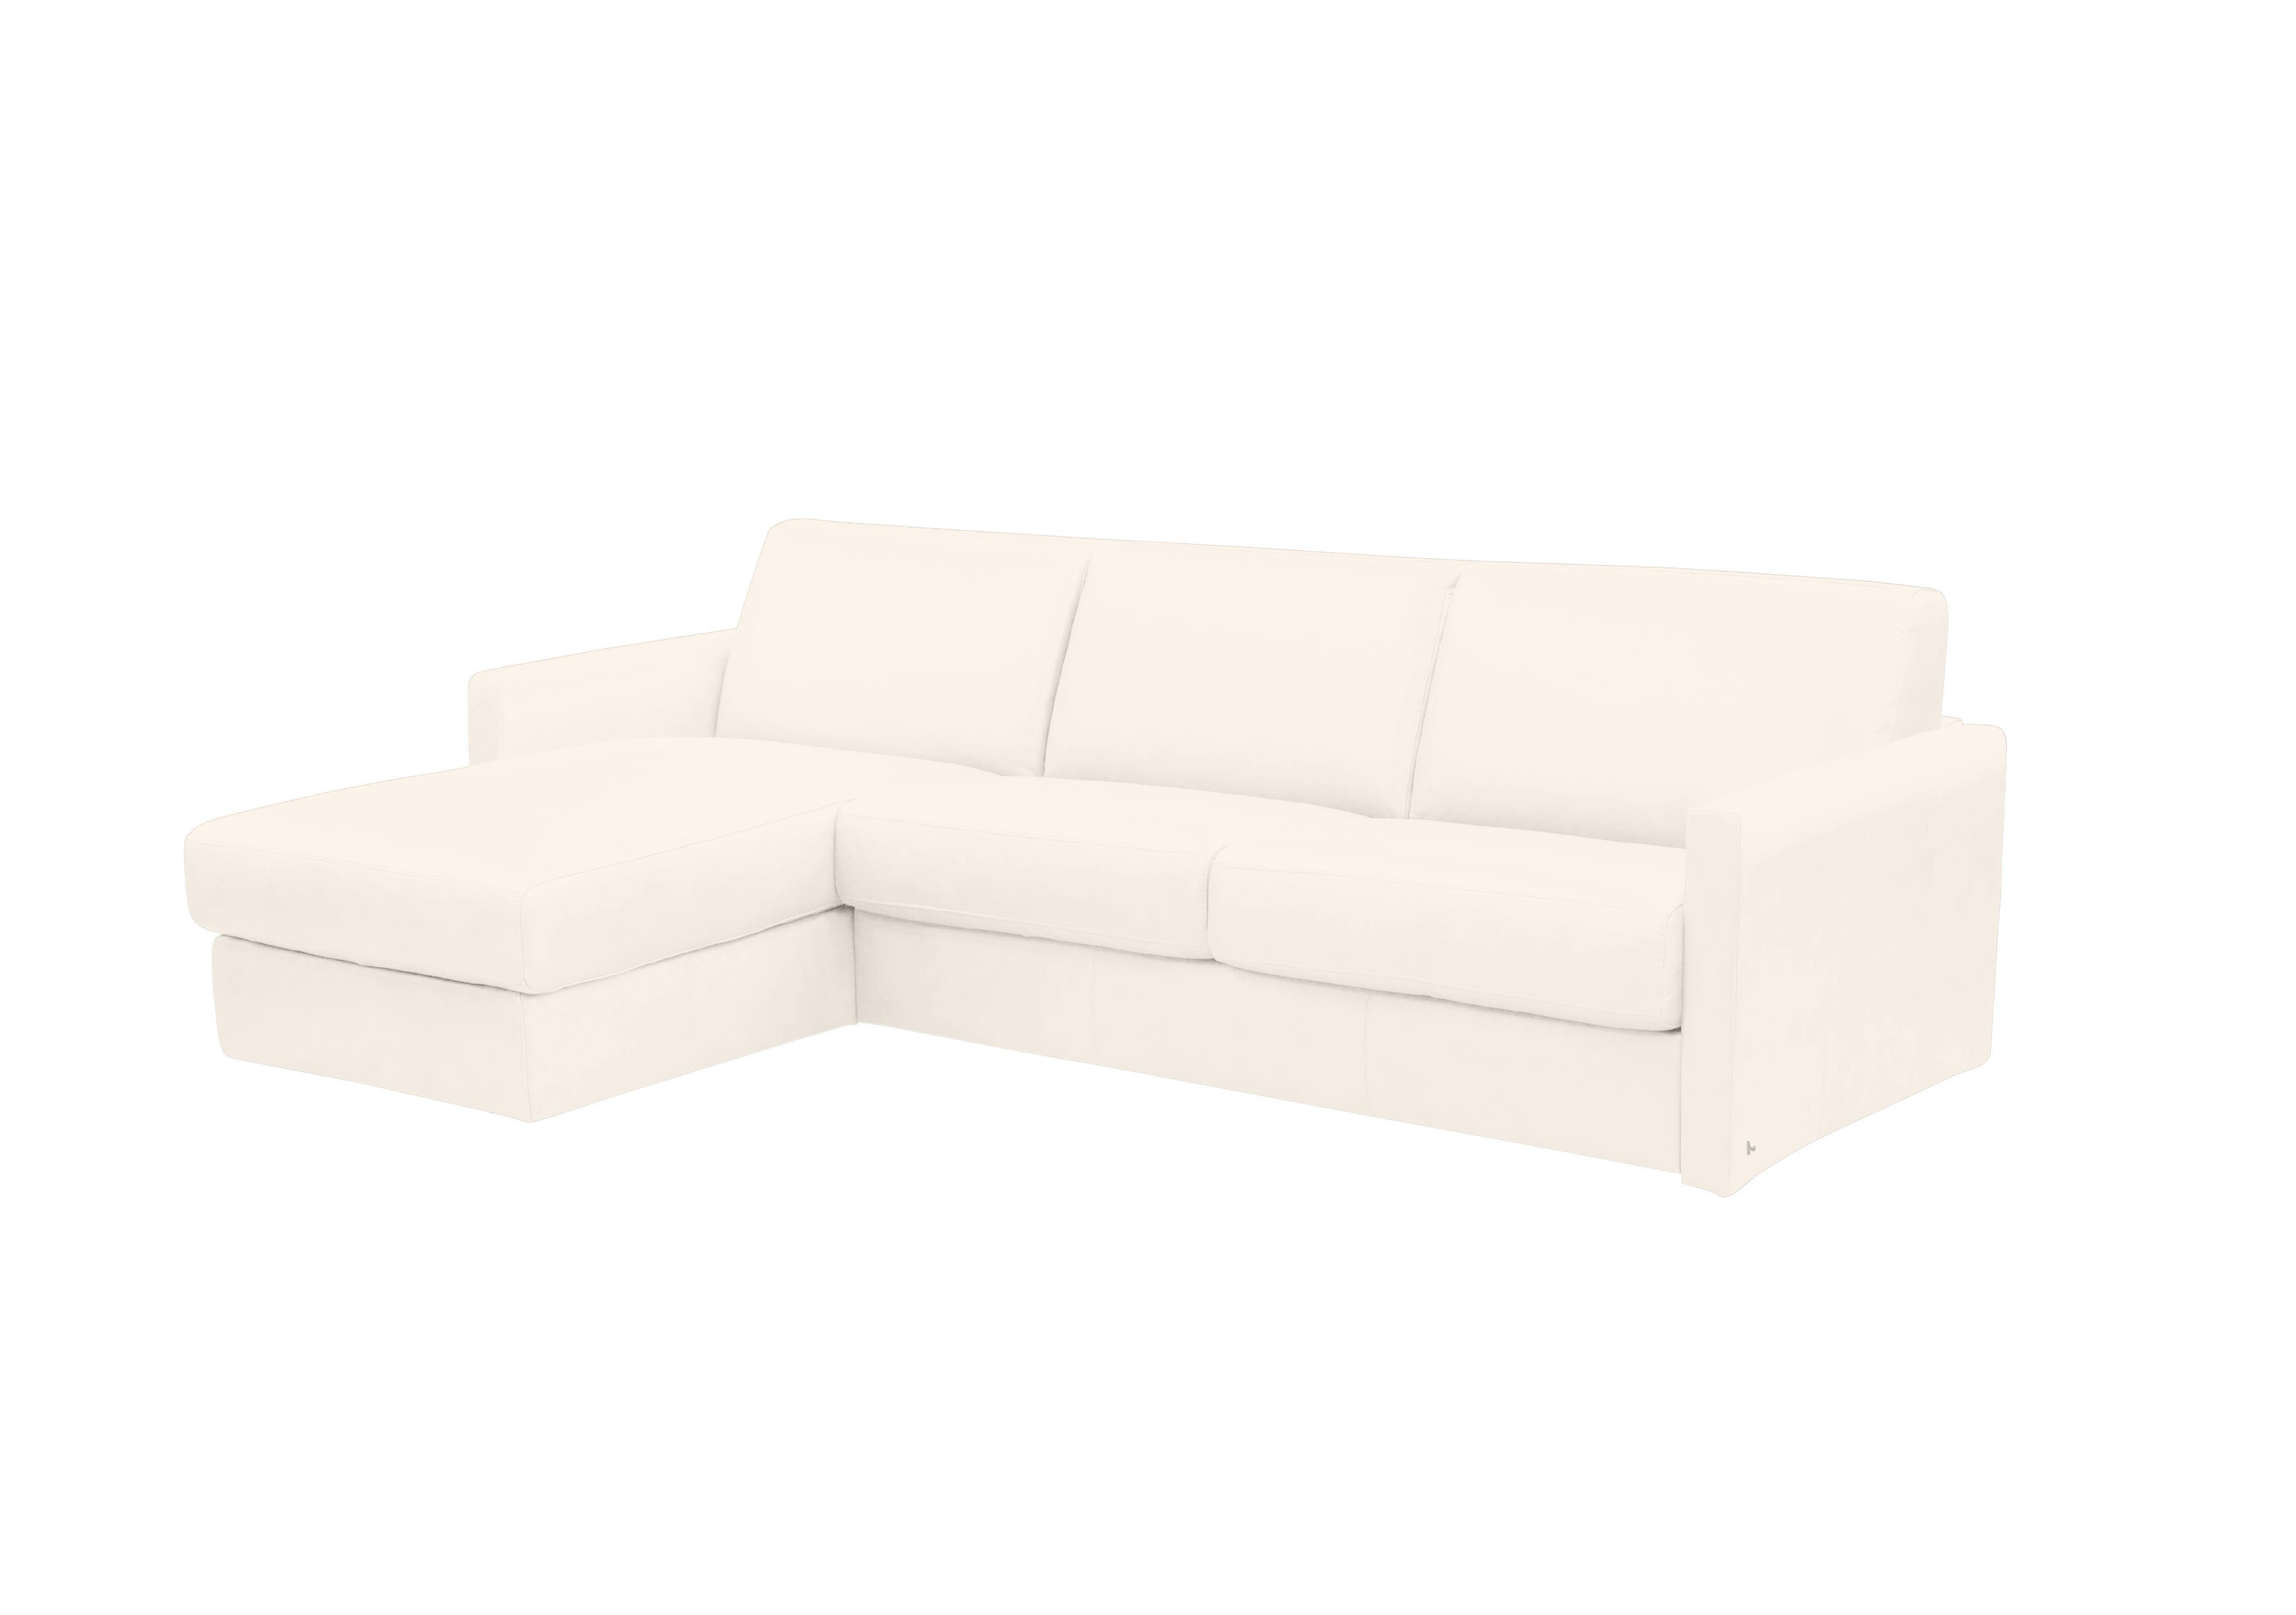 Alcova 3 Seater Leather Sofa Bed with Storage Chaise and Slim Arms in Torello Bianco 93 on Furniture Village